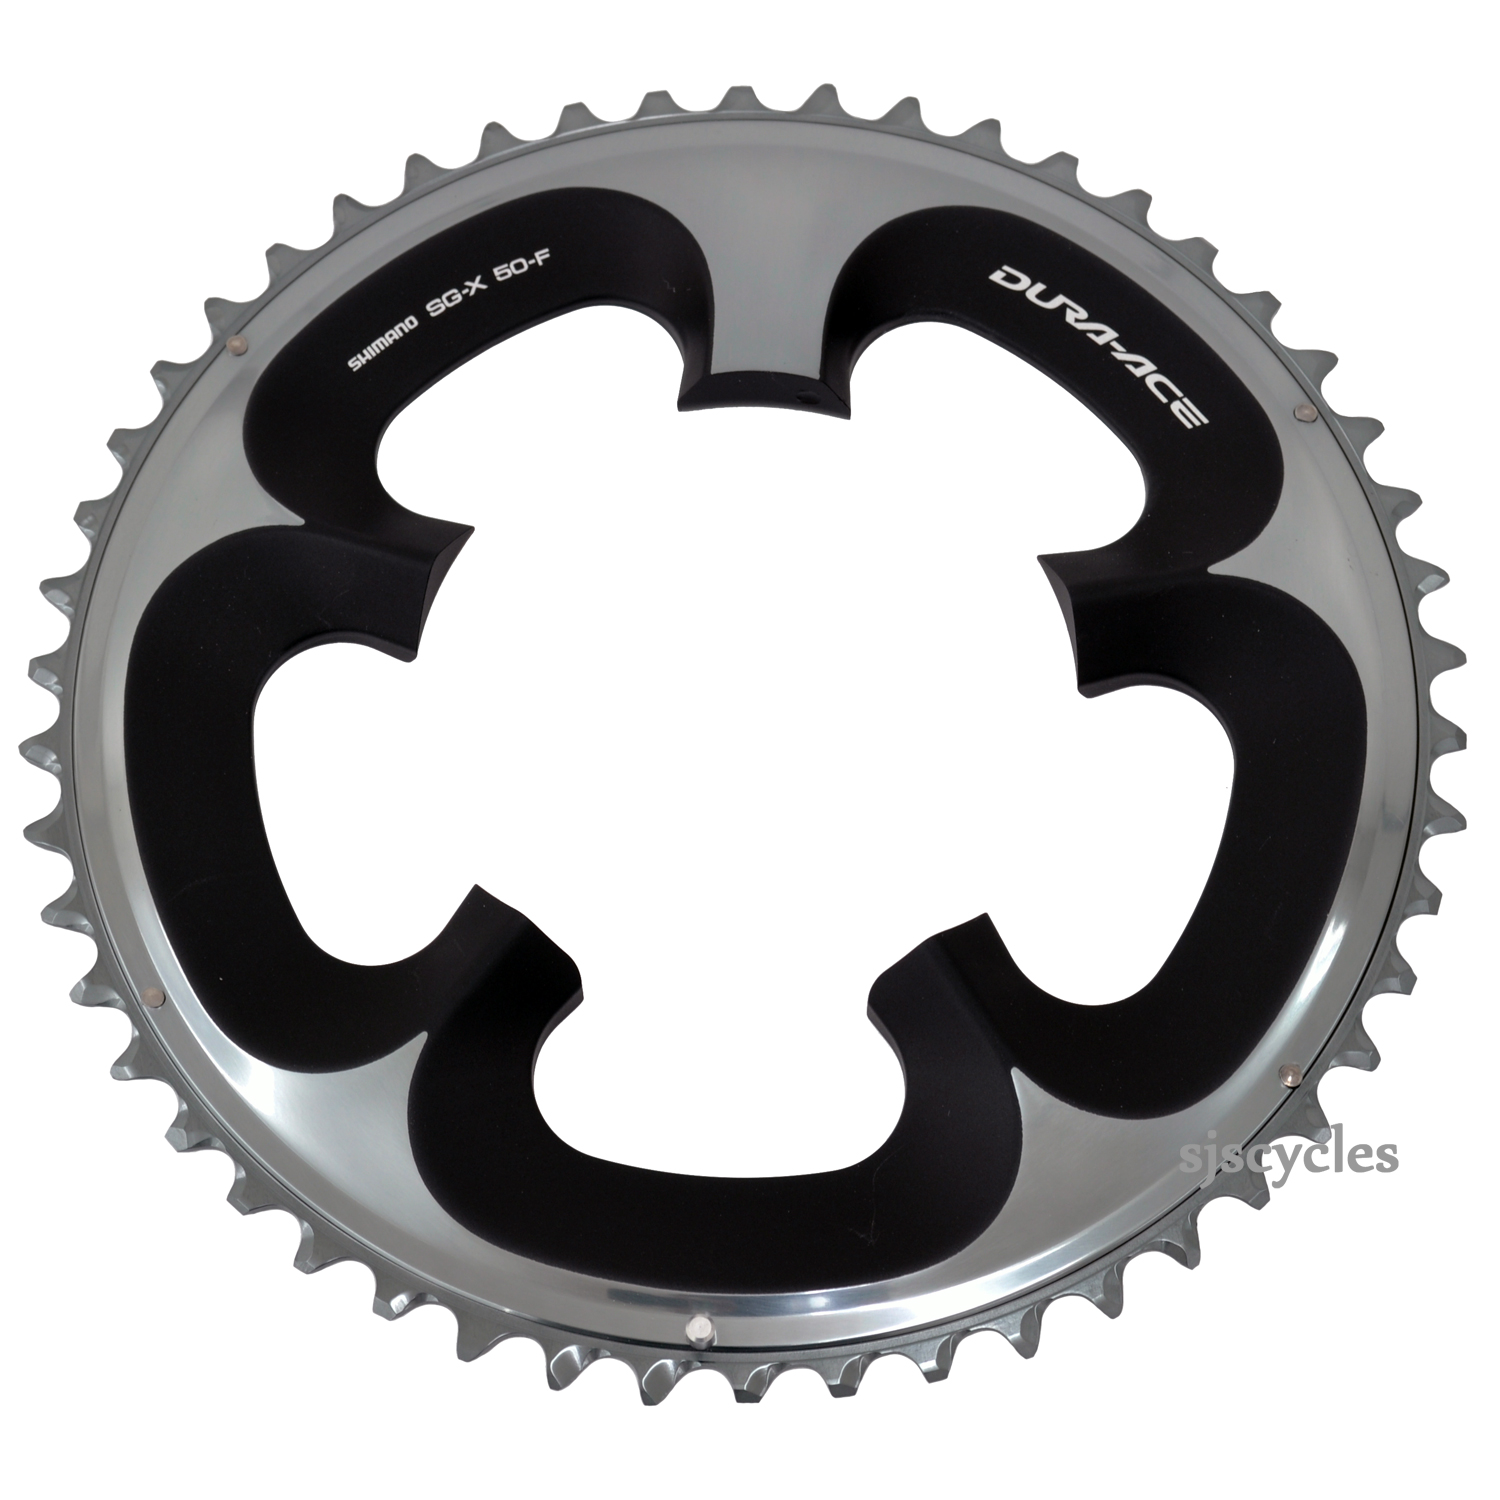 FC-7950 Dura-Ace chainring 50T F-type Shimano Spares 